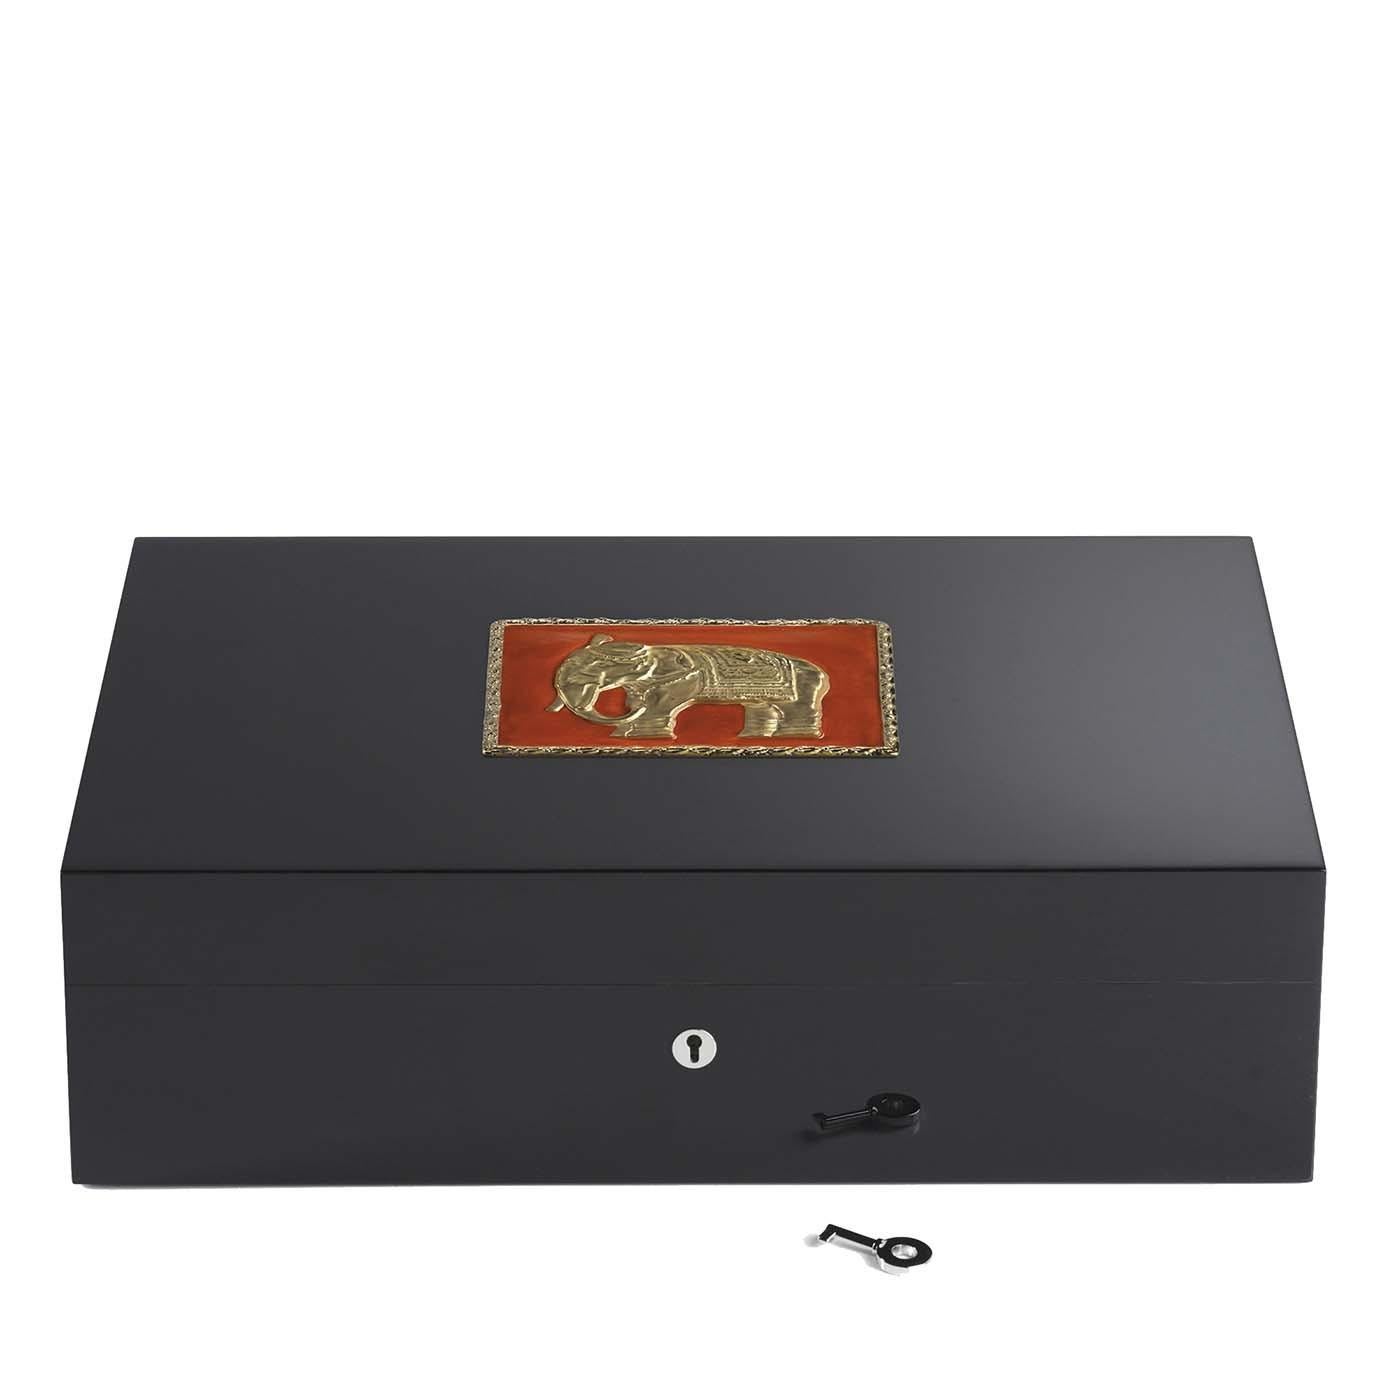 Named after one of the Indian states known for elephants, this exquisite wooden humidor contains up to 110 cigars. The decoration on top of the lid features a red background, with golden edges and the reproduction of an elephant in the same finish.